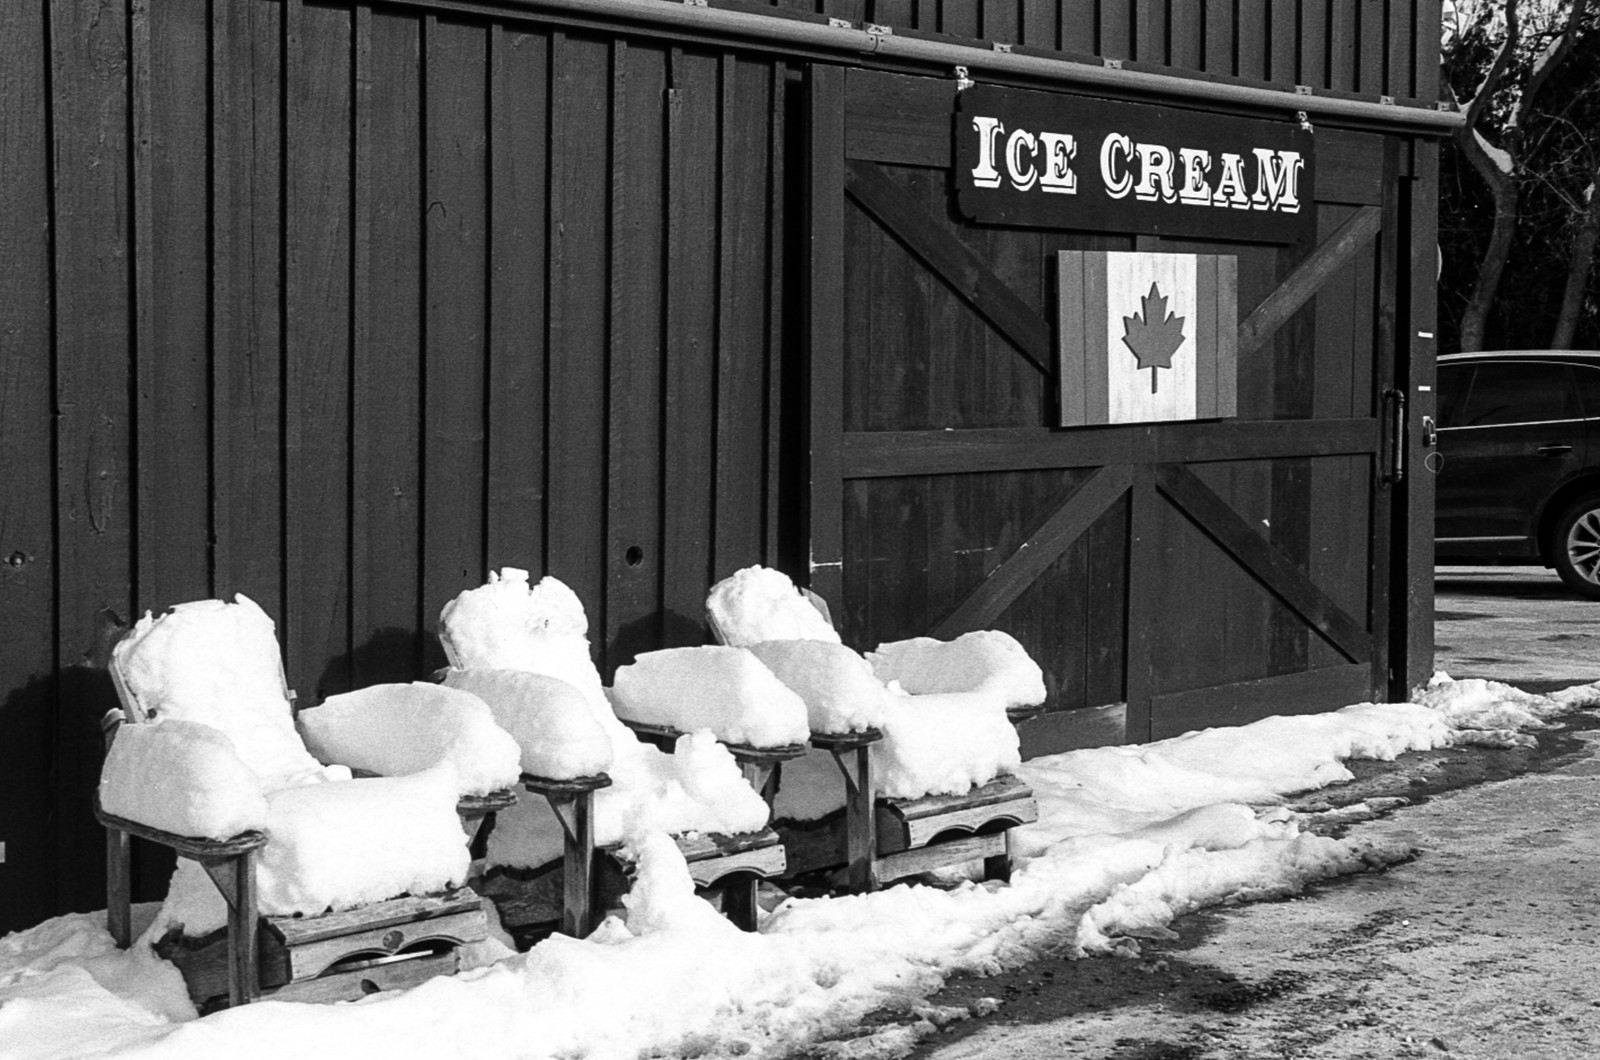 Snow Covered Chairs and No Ice Cream Feb 2023